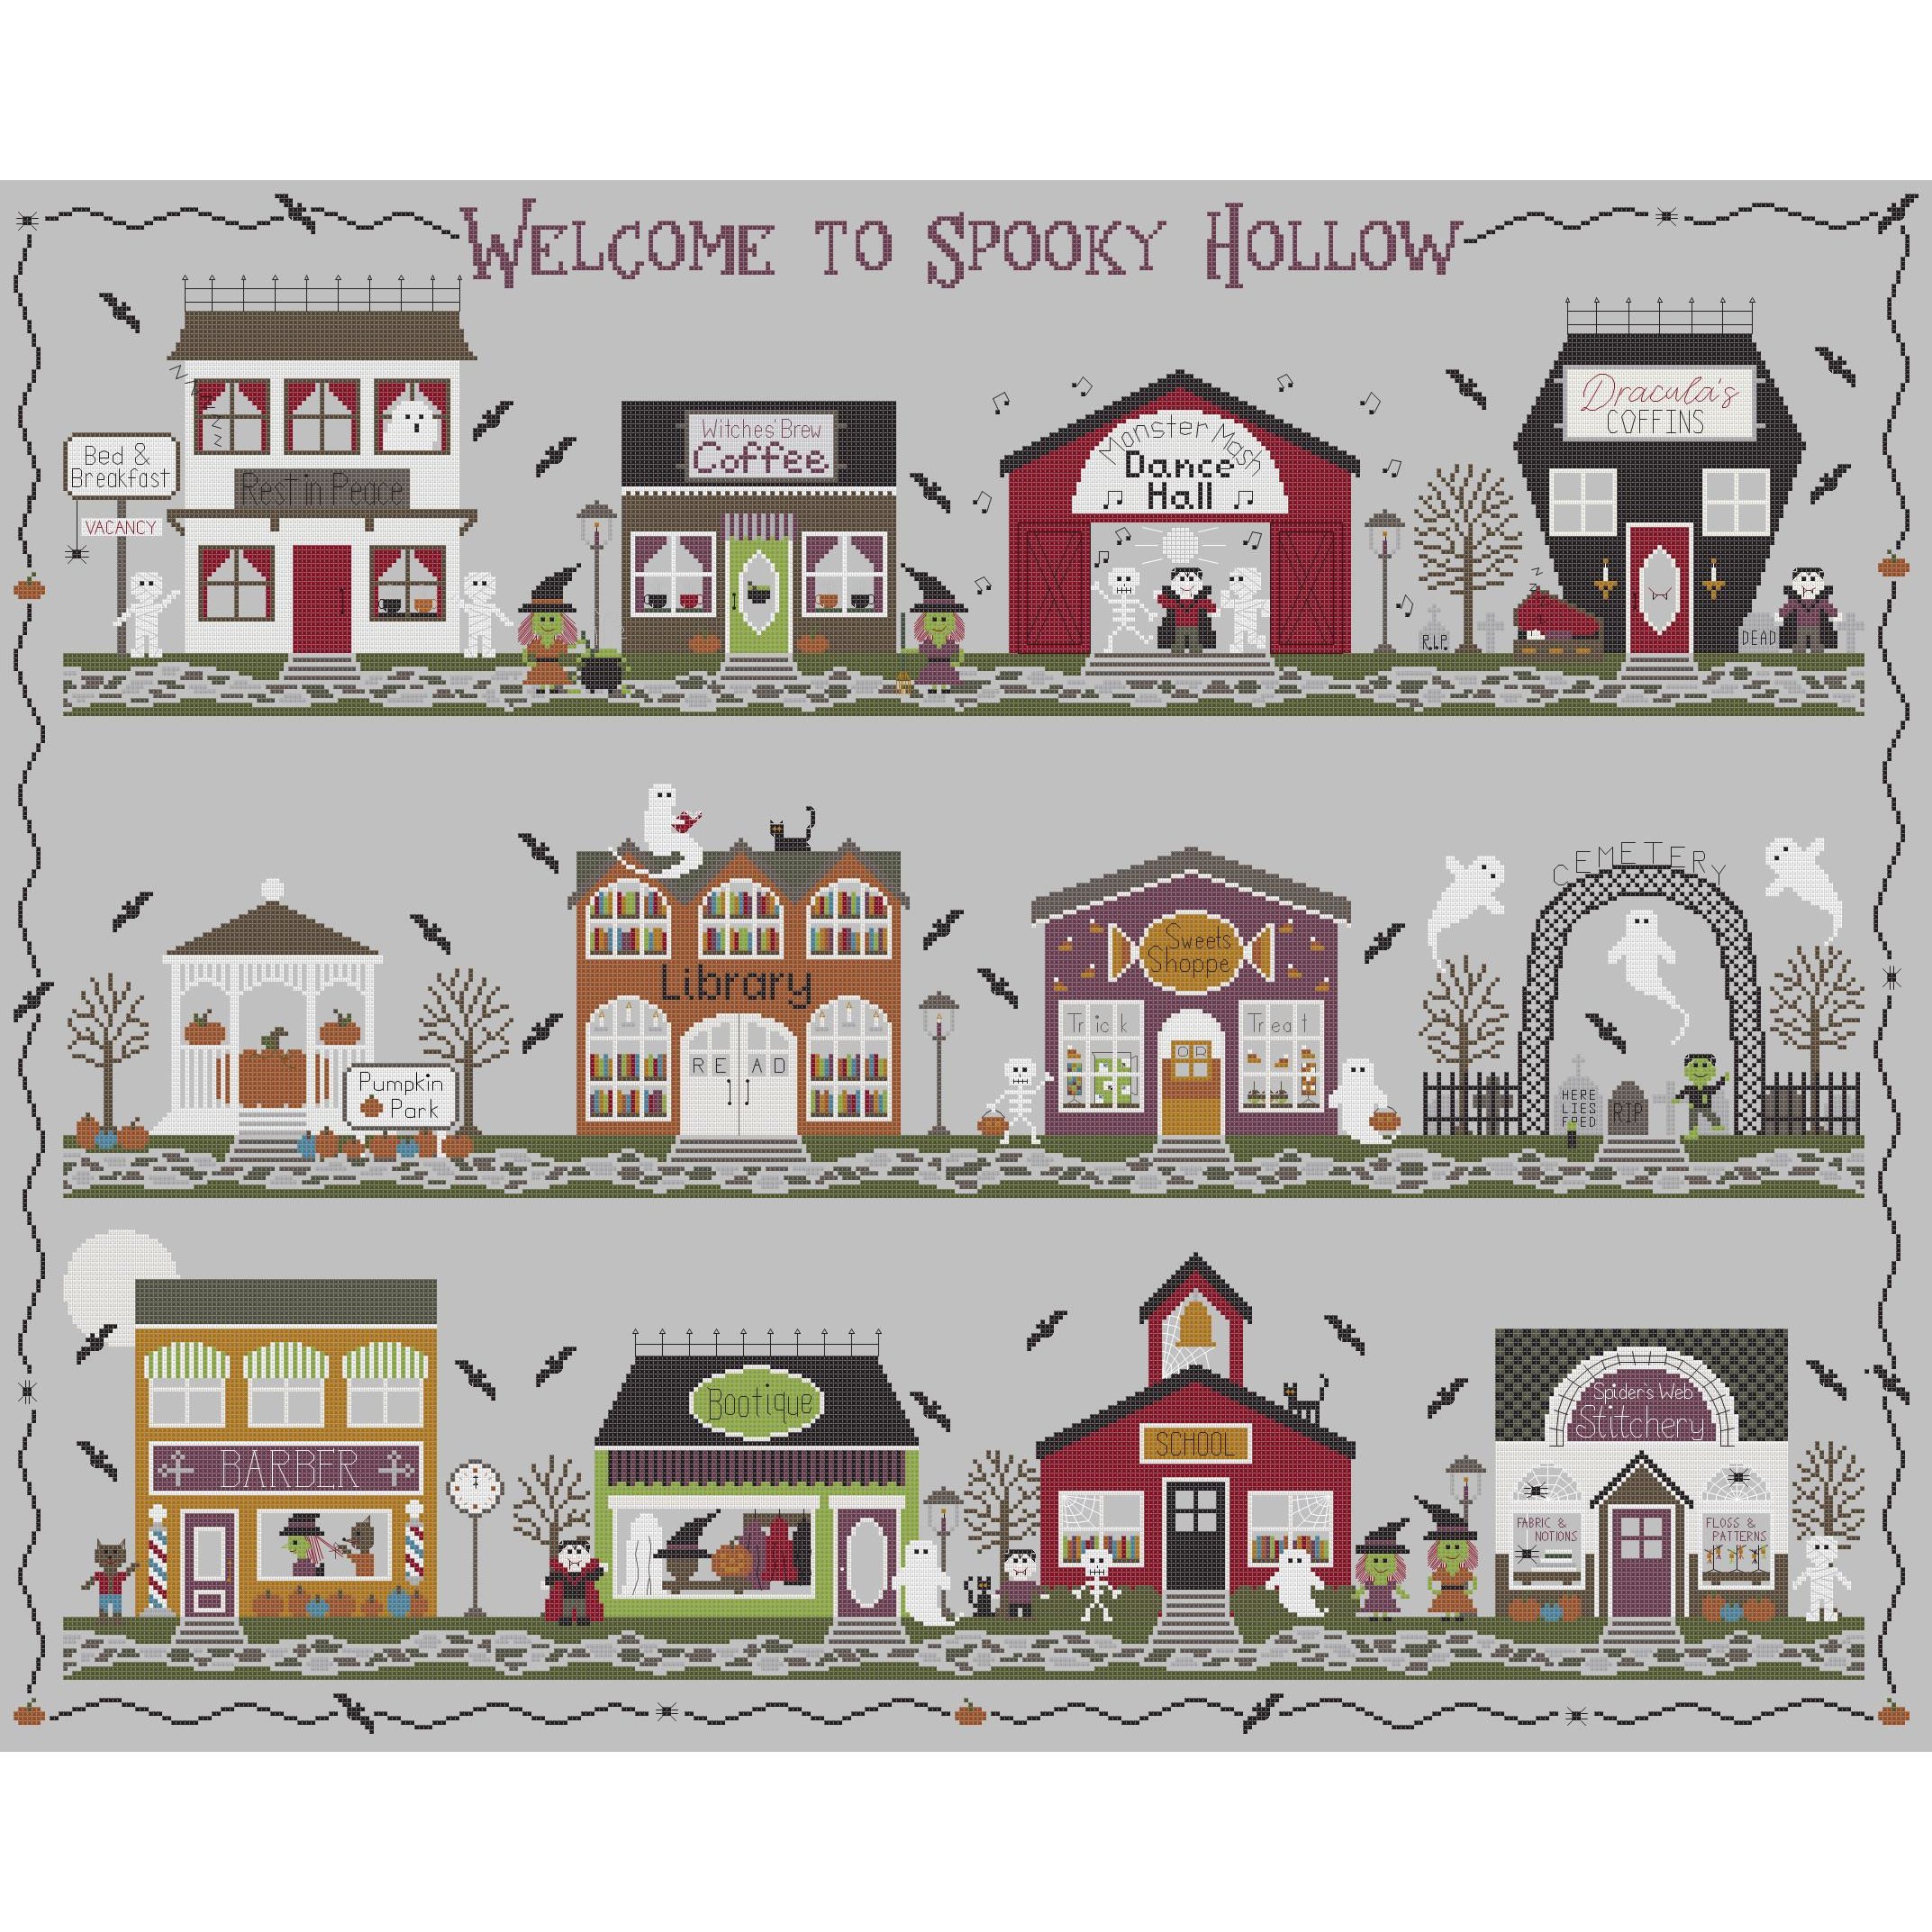 Spooky Hollow 4x3 Border  |  Stitch Count: 423 x 343